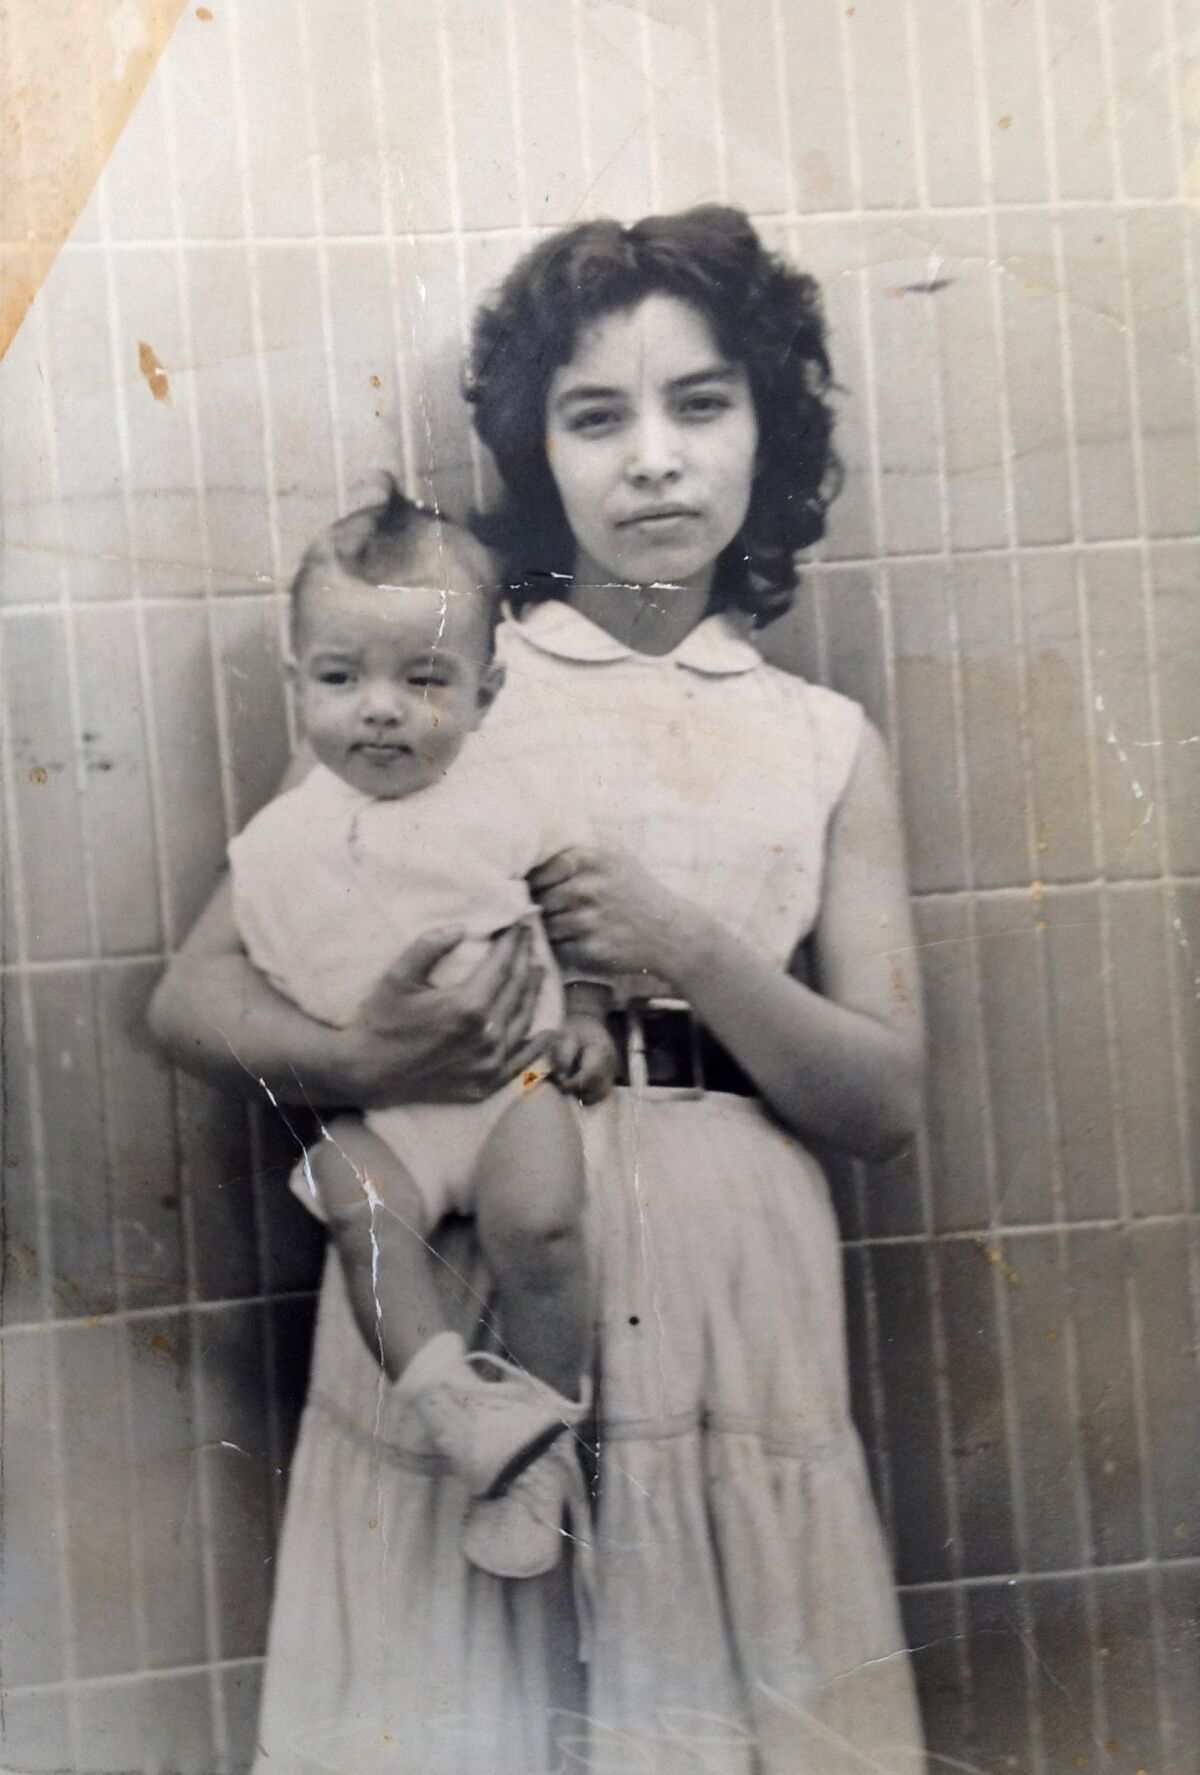 The writer's grandmother, Carolina, holding the writer's father, in Mexico City in 1956.